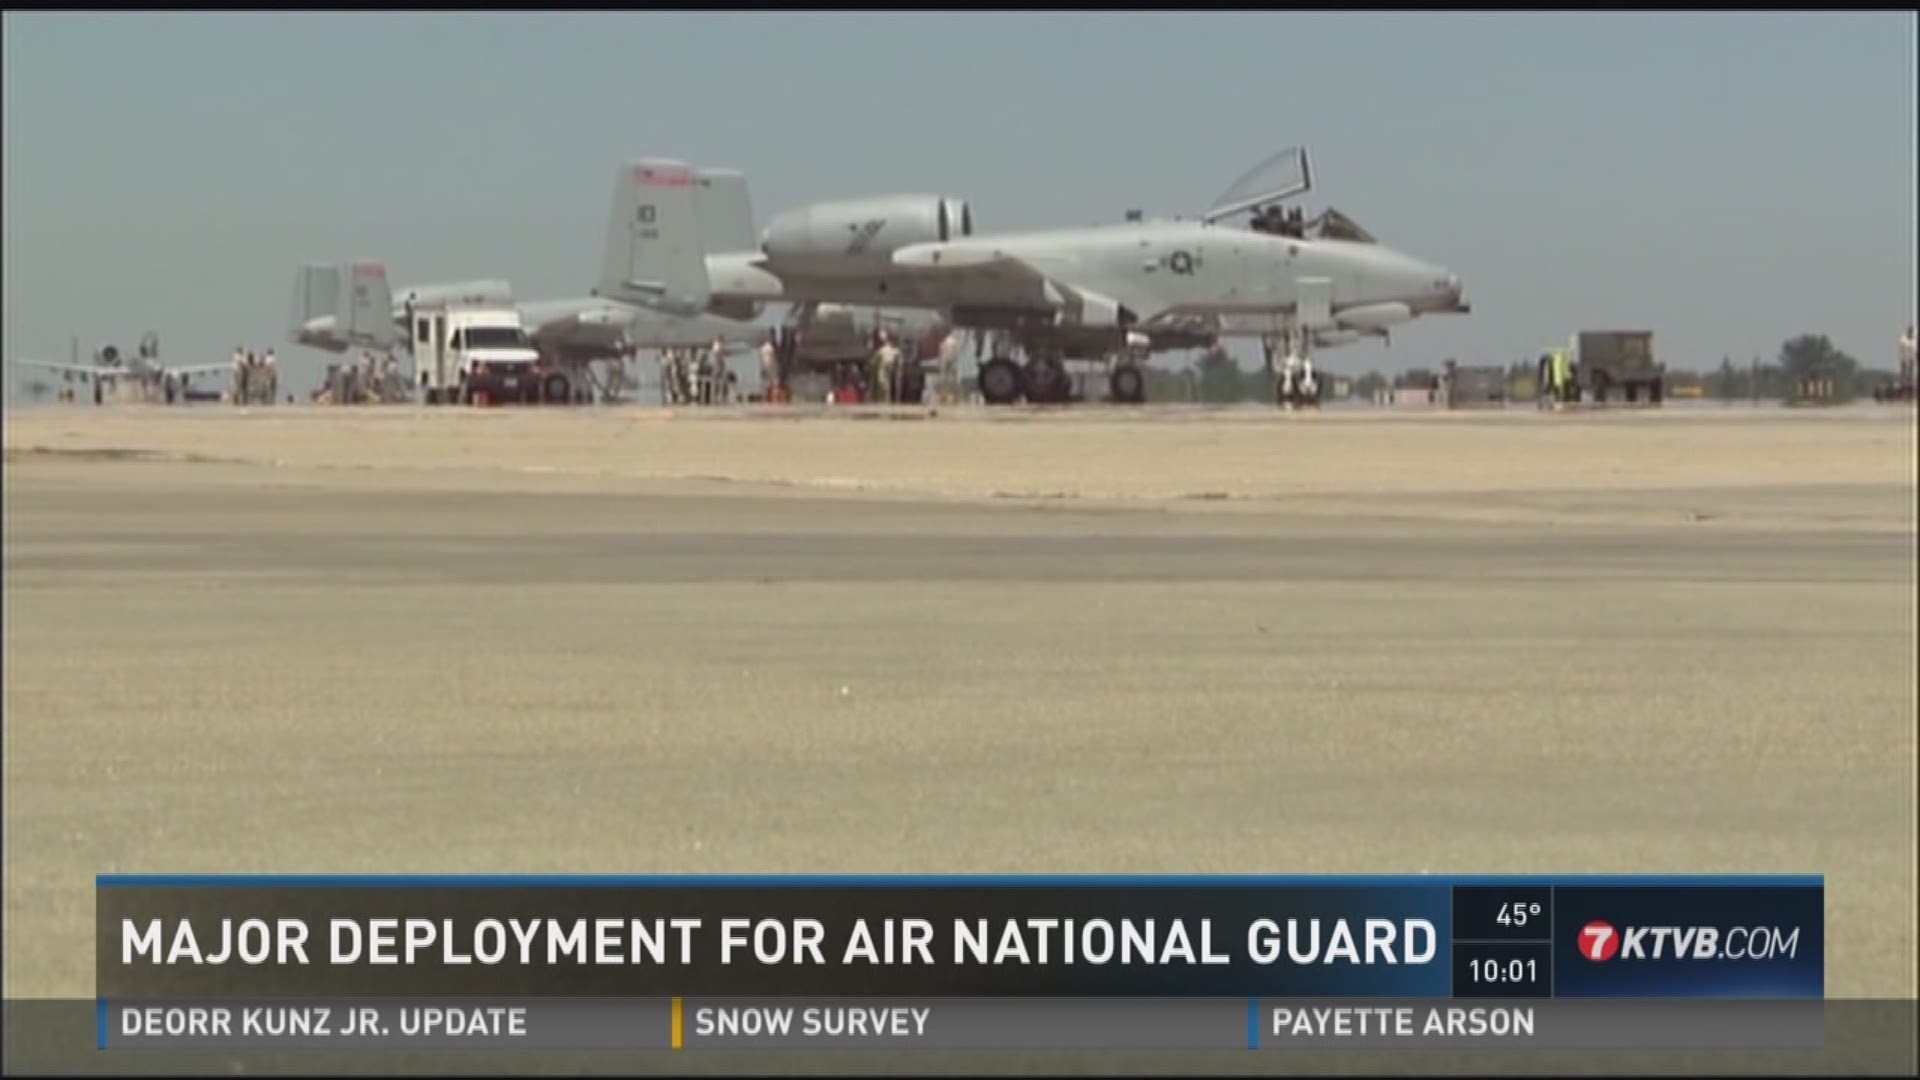 Major deployment for Air National Guard.